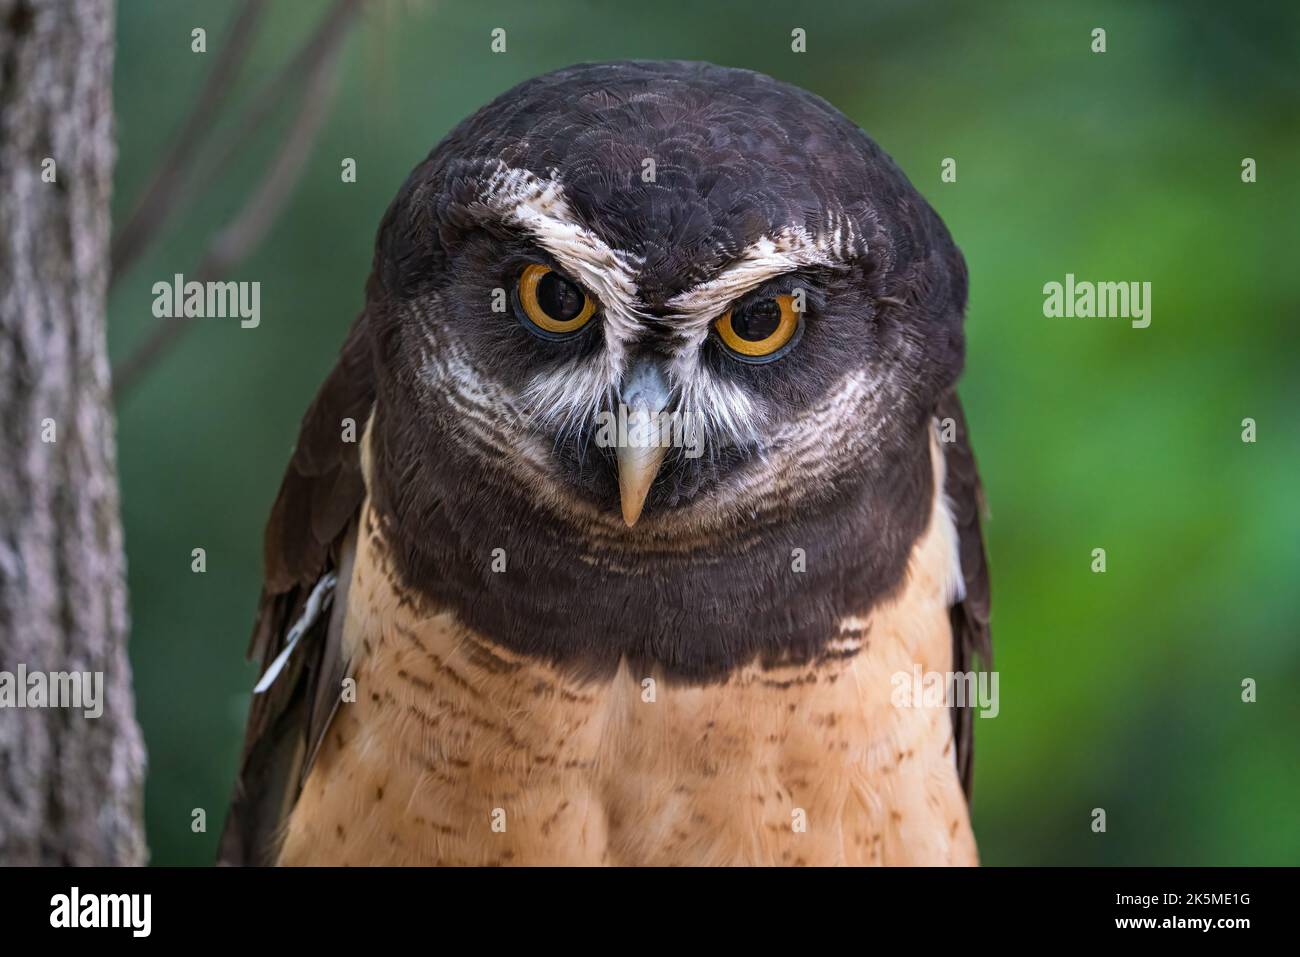 A spectacled owl portrait Stock Photo